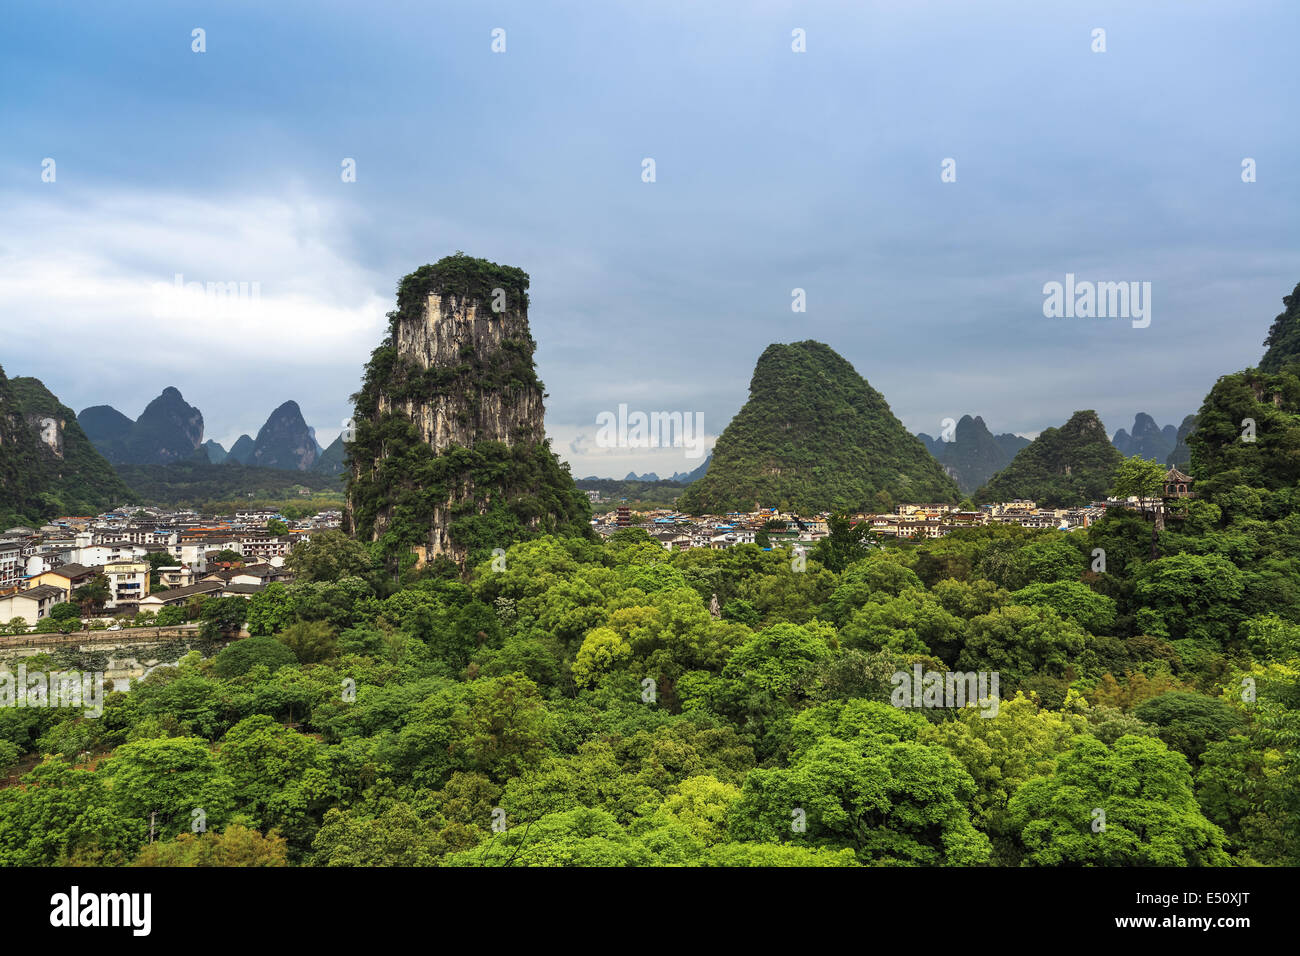 yangshuo county town surrounded by mountains Stock Photo